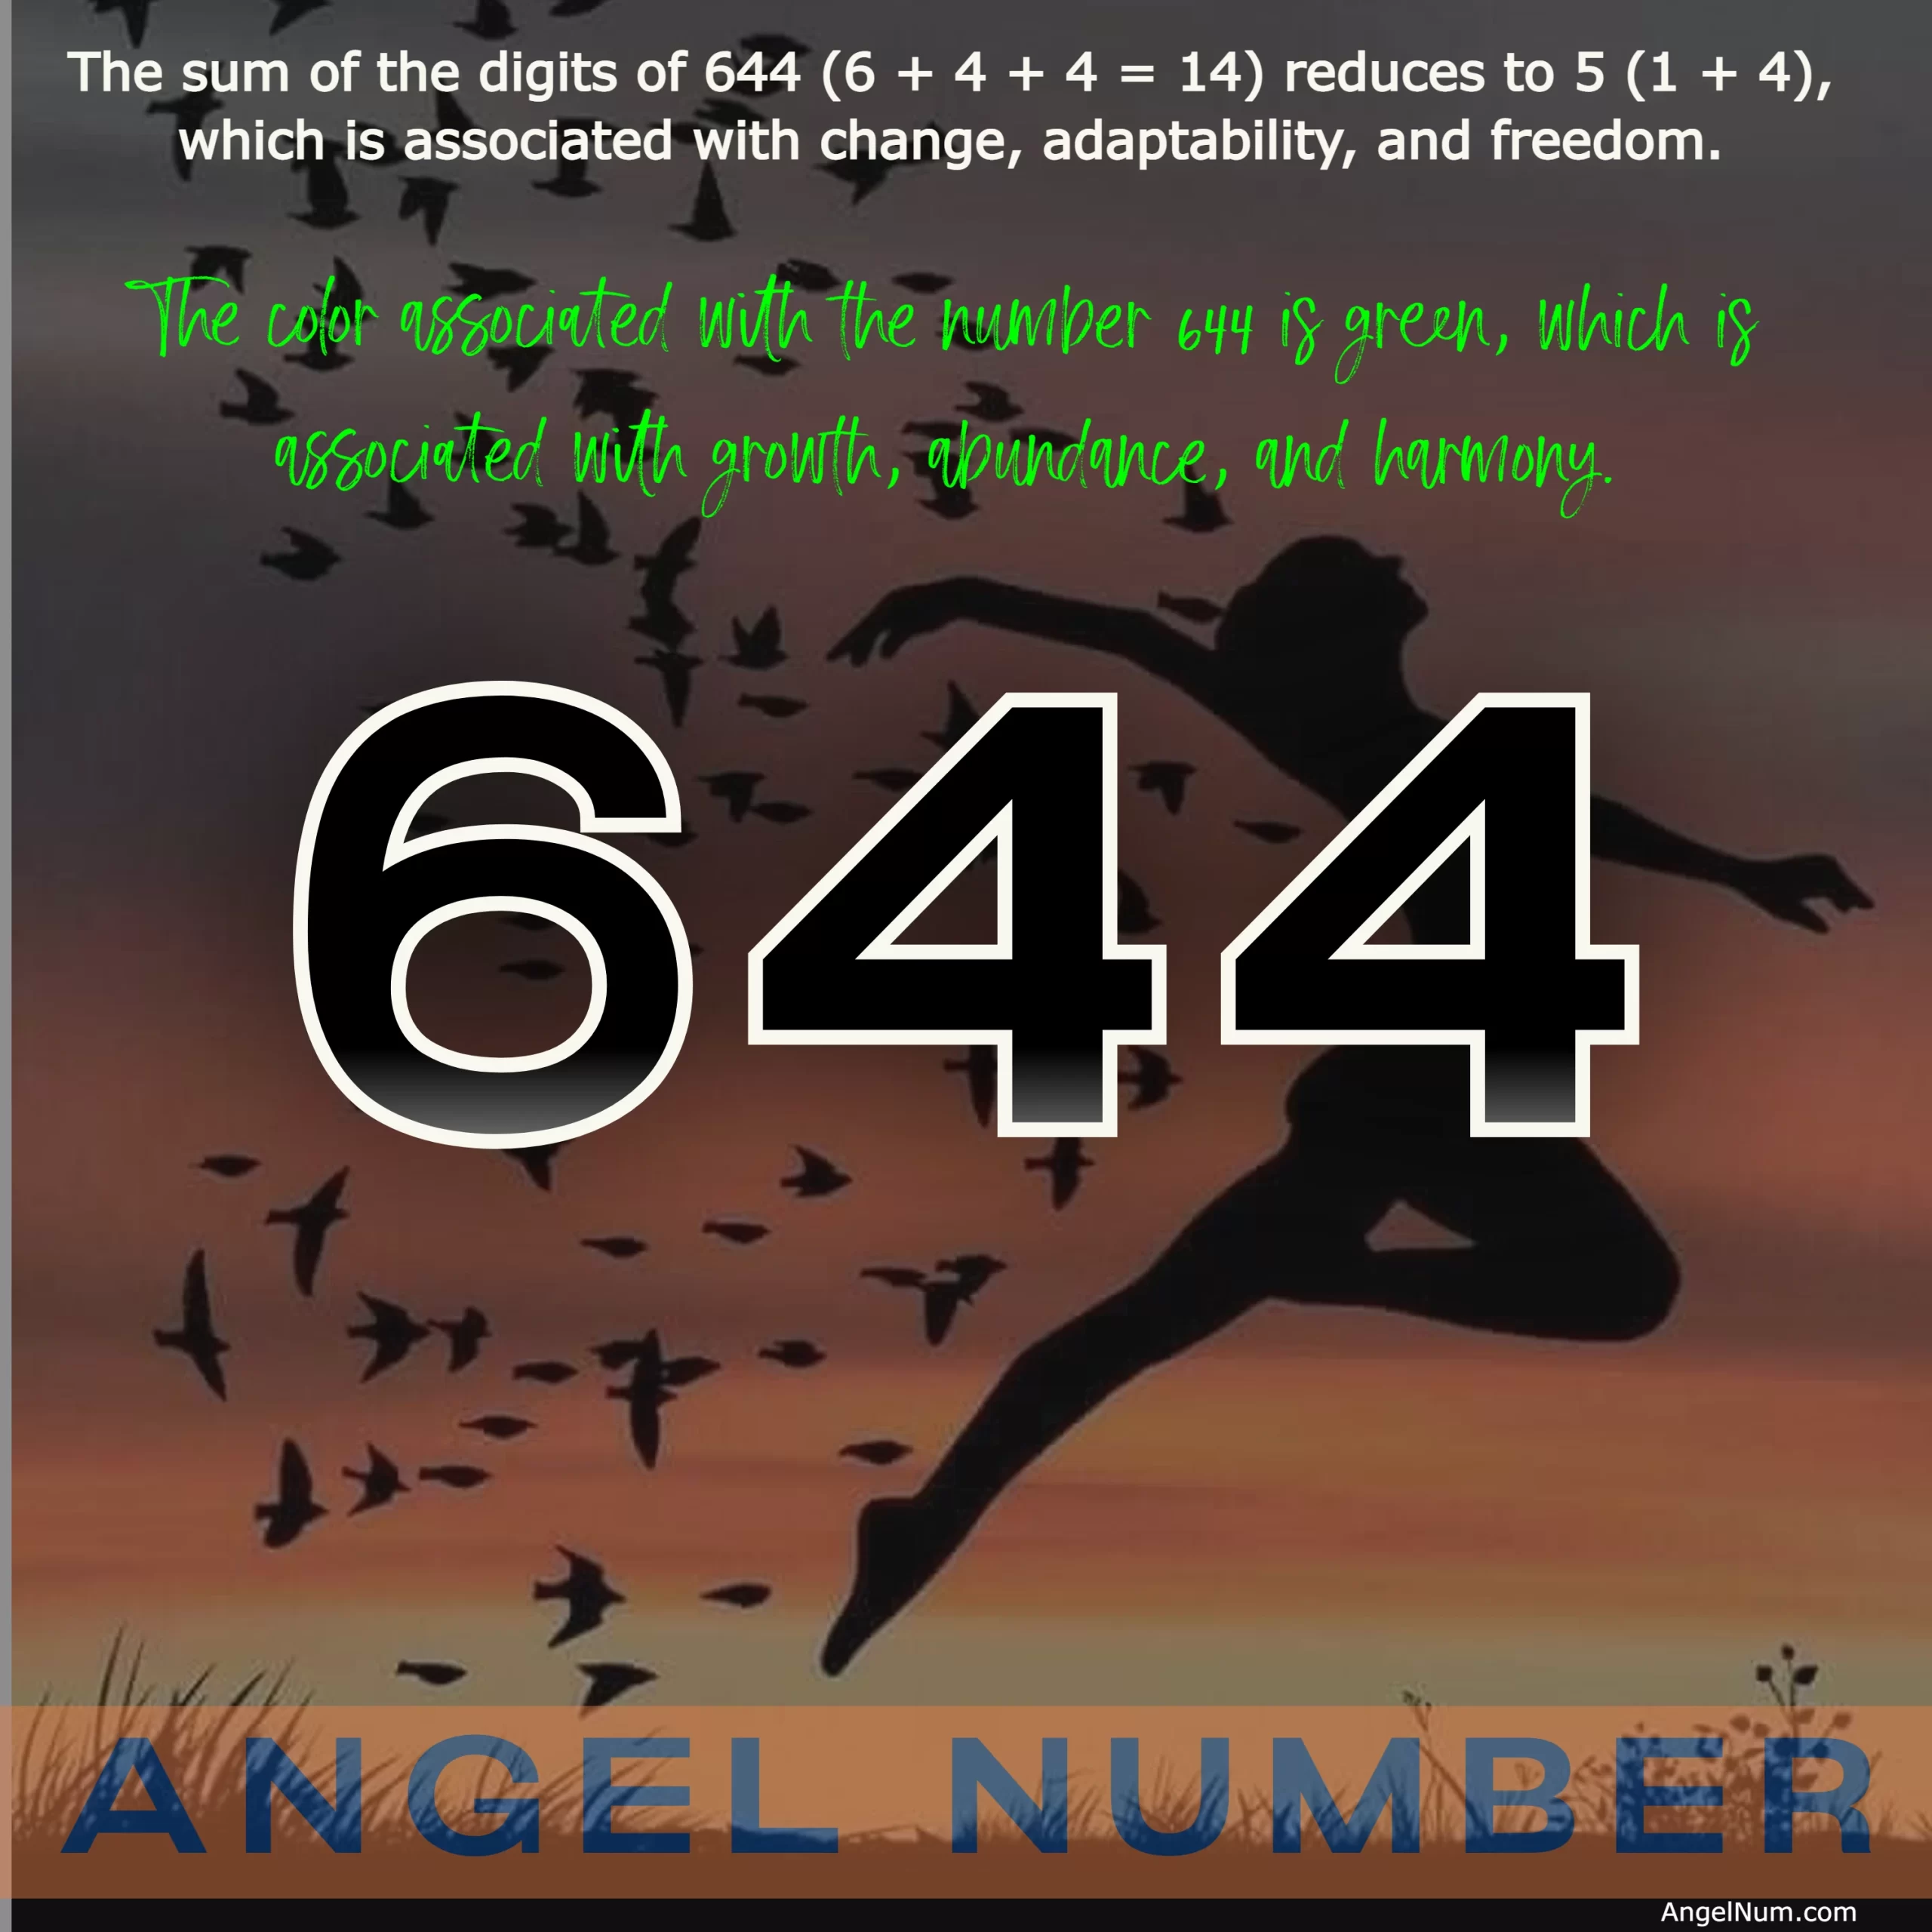 Angel Number 644: What It Means and How It Can Impact Your Life